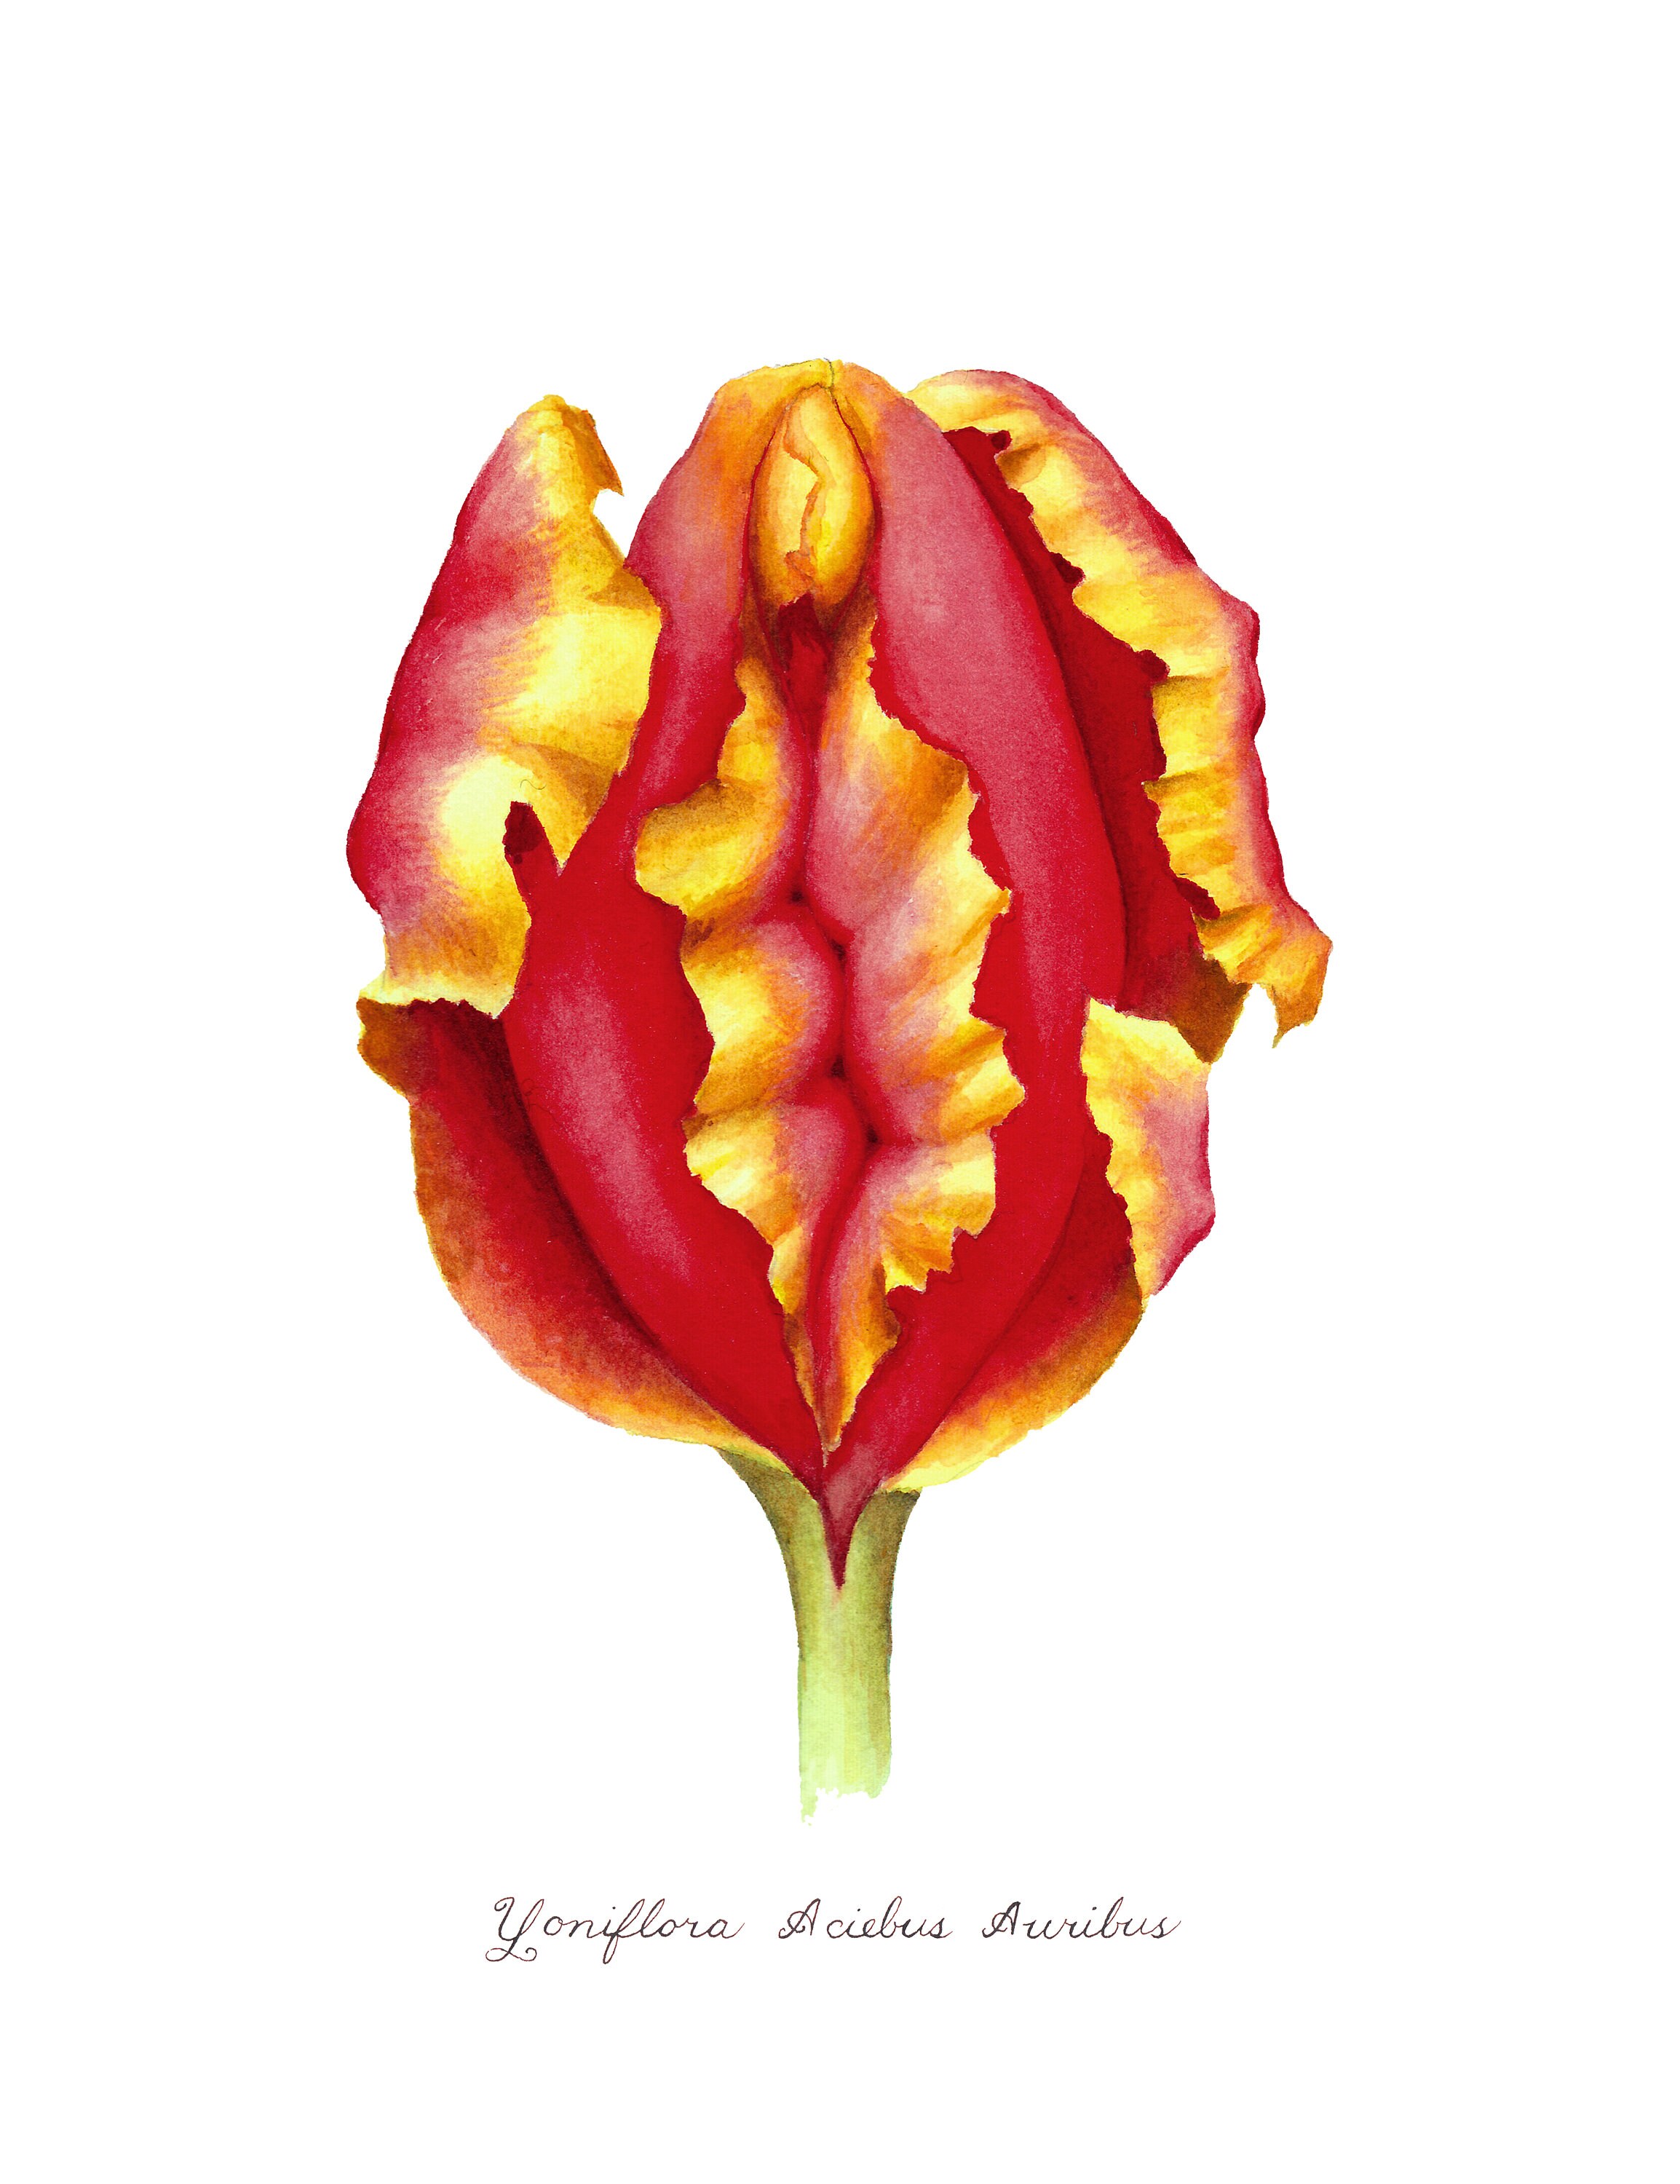 A Private Language of Flowers: Red Tulips and Their Erotic Implications